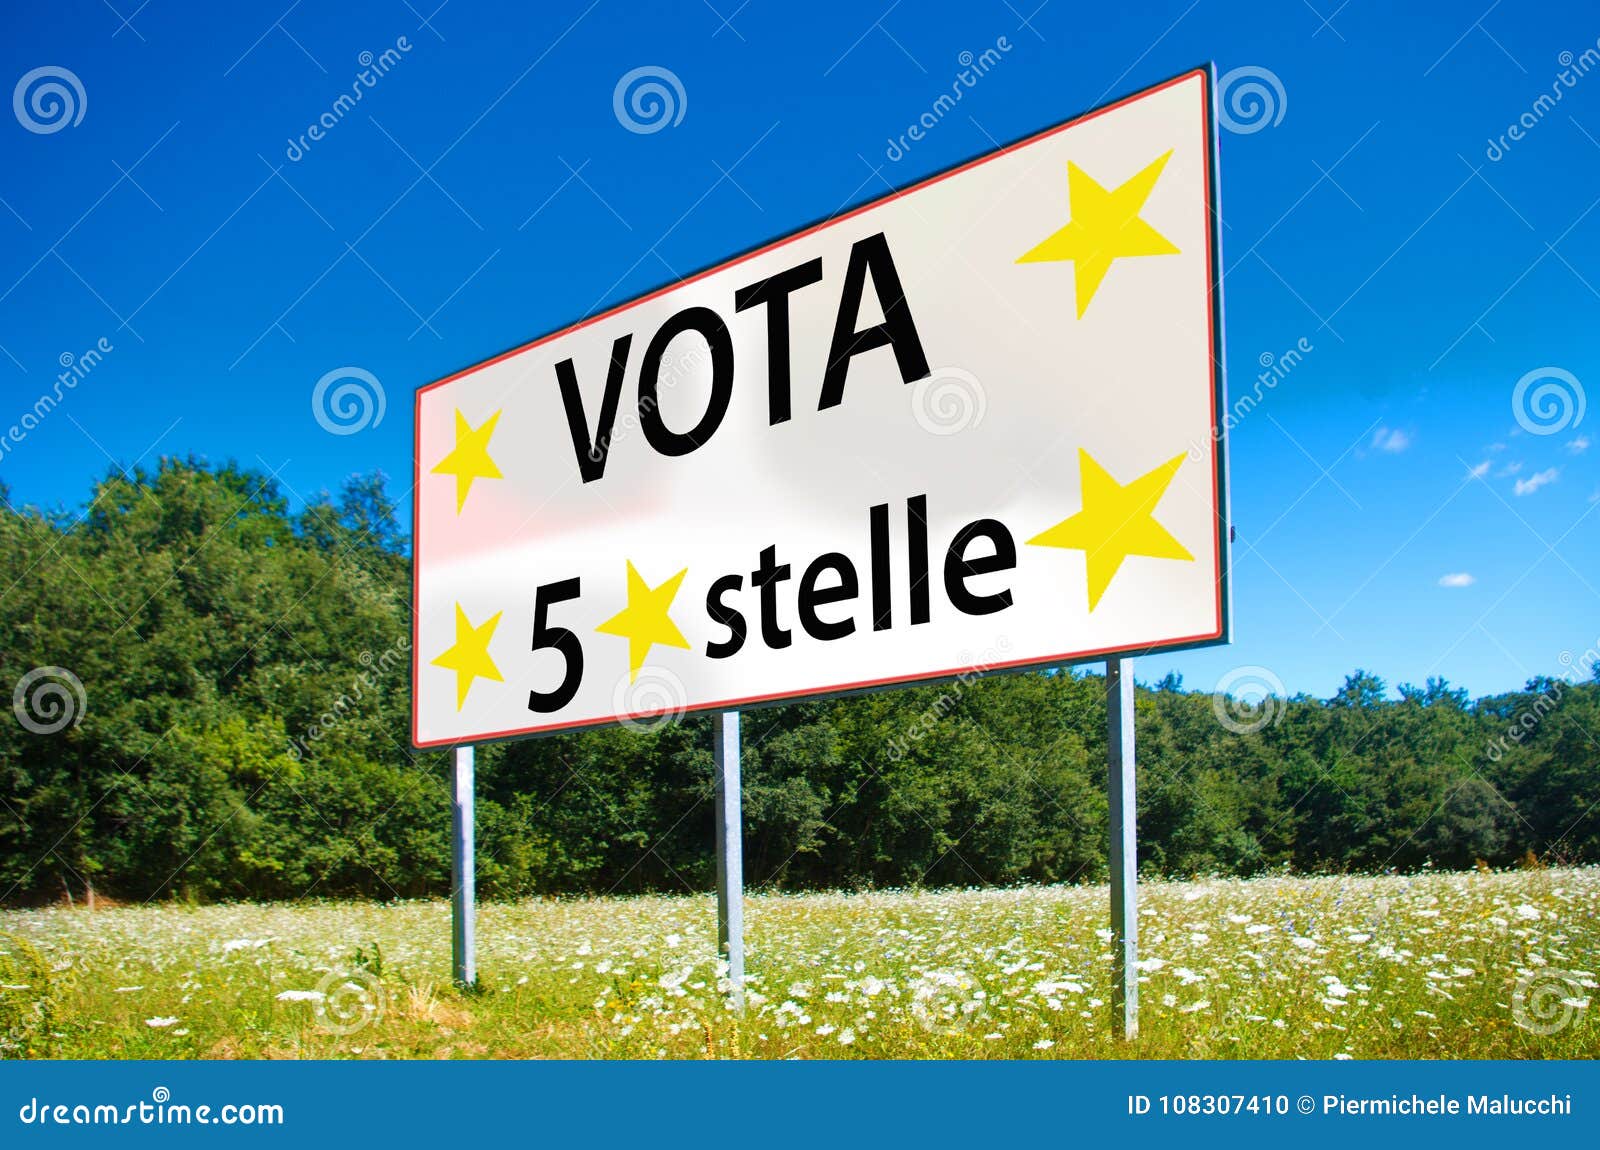 in the next elections save italy, vote movimento cinque stelle,